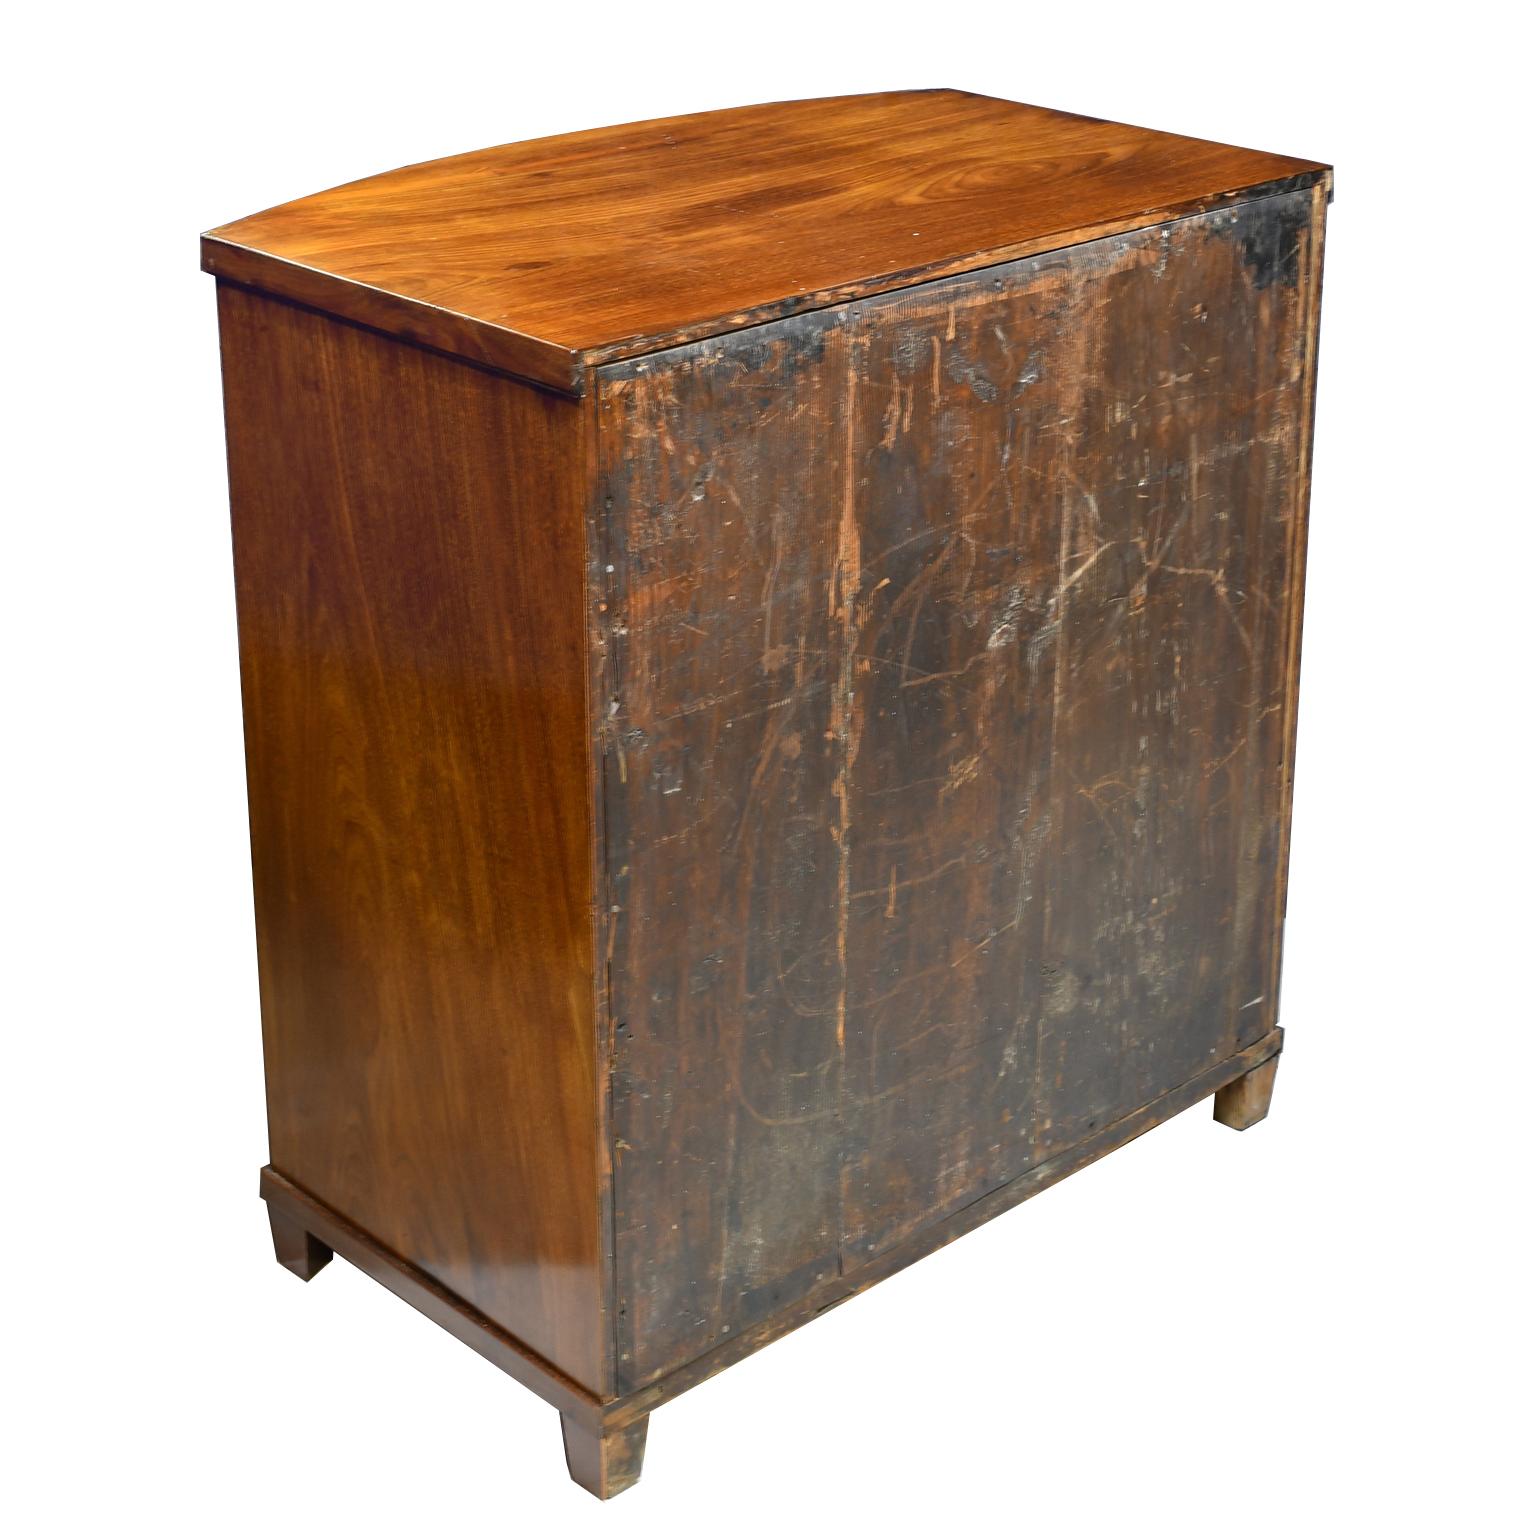 19th Century Small Antique Empire Chest of Drawers/Nightstand in West Indies Mahogany, c 1810